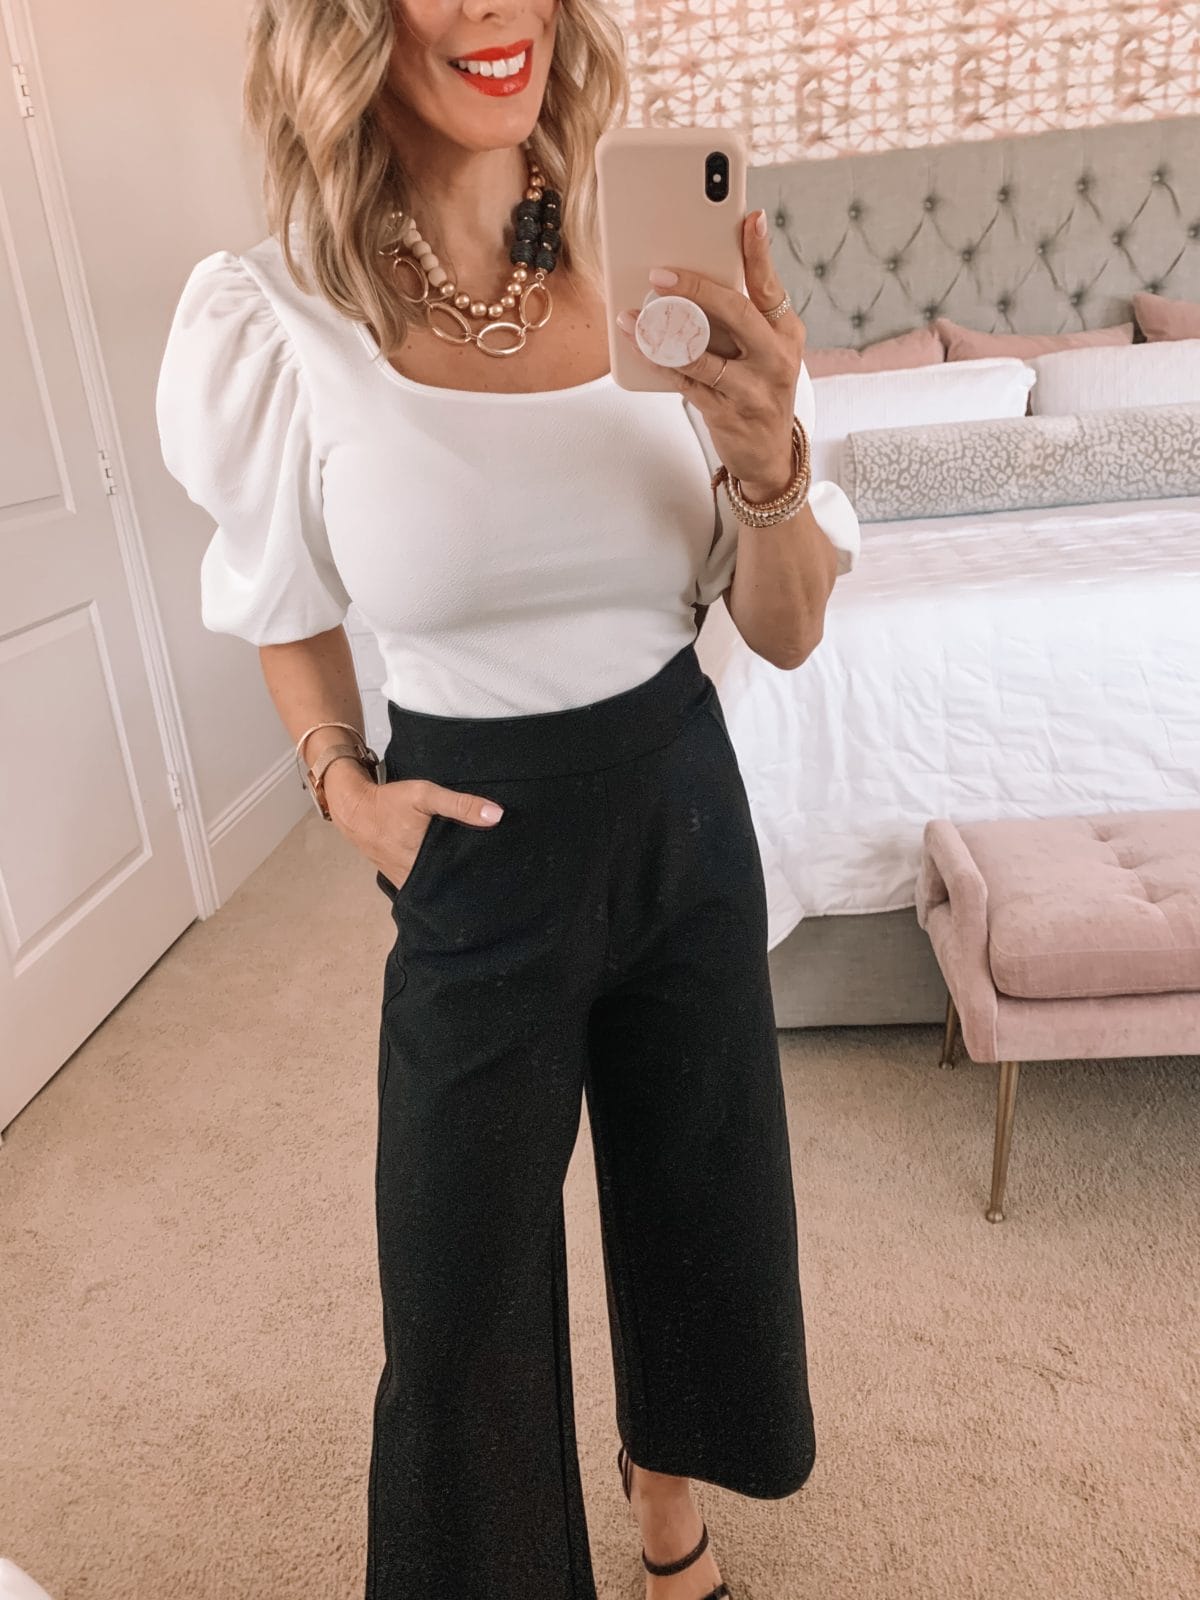 Amazon Fashion Faves, Puff Sleeve Top, Wide Leg Pants, Heels, Statement Necklace 